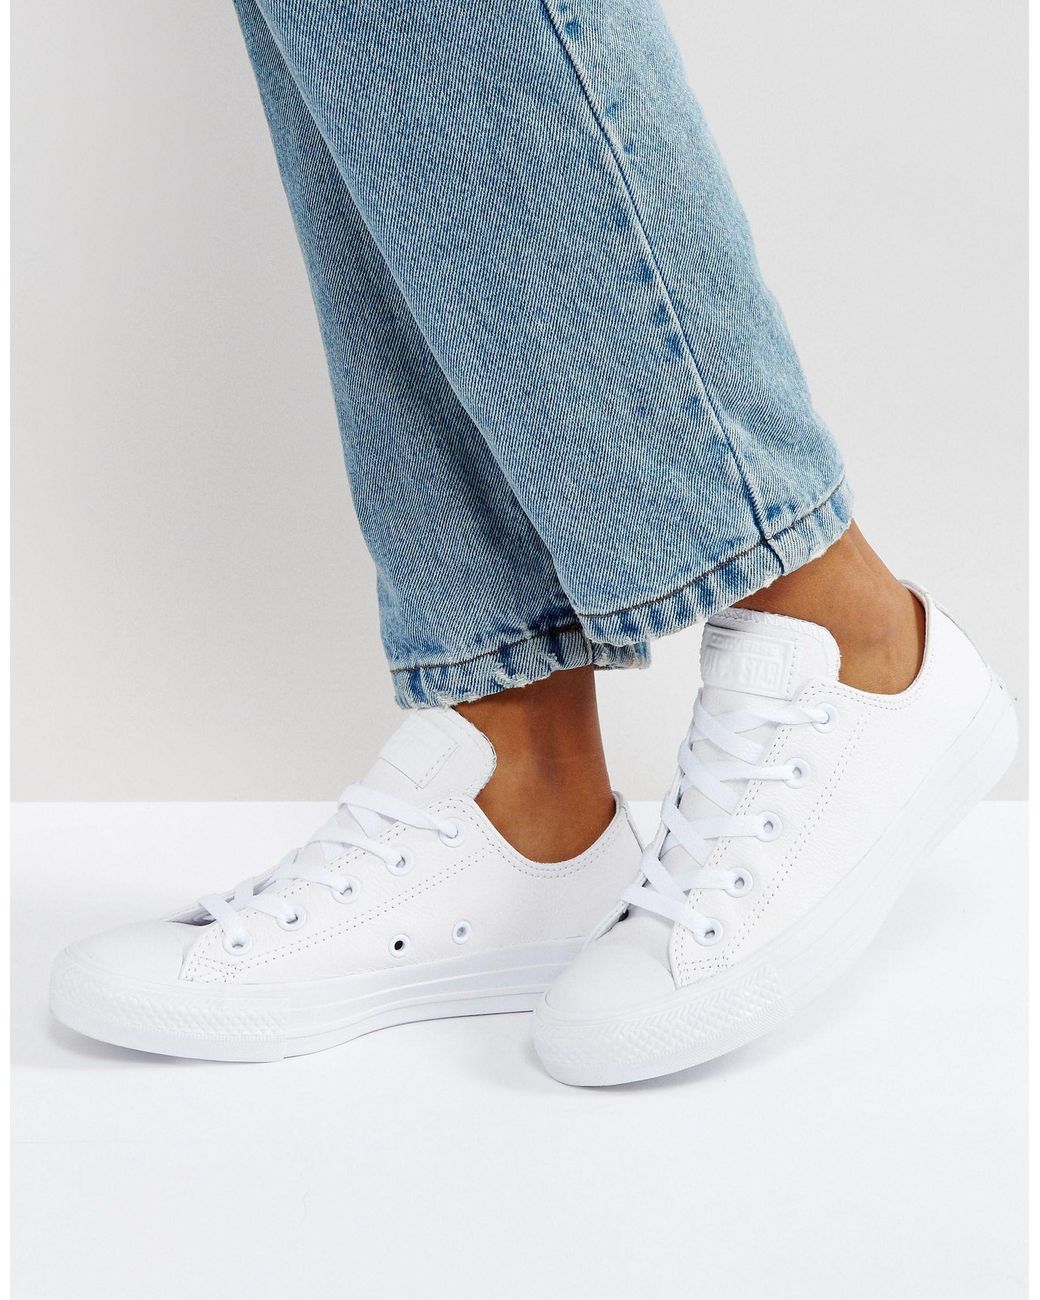 Converse Chuck Taylor Ox Leather Monochrome Sneakers in | Lyst Canada